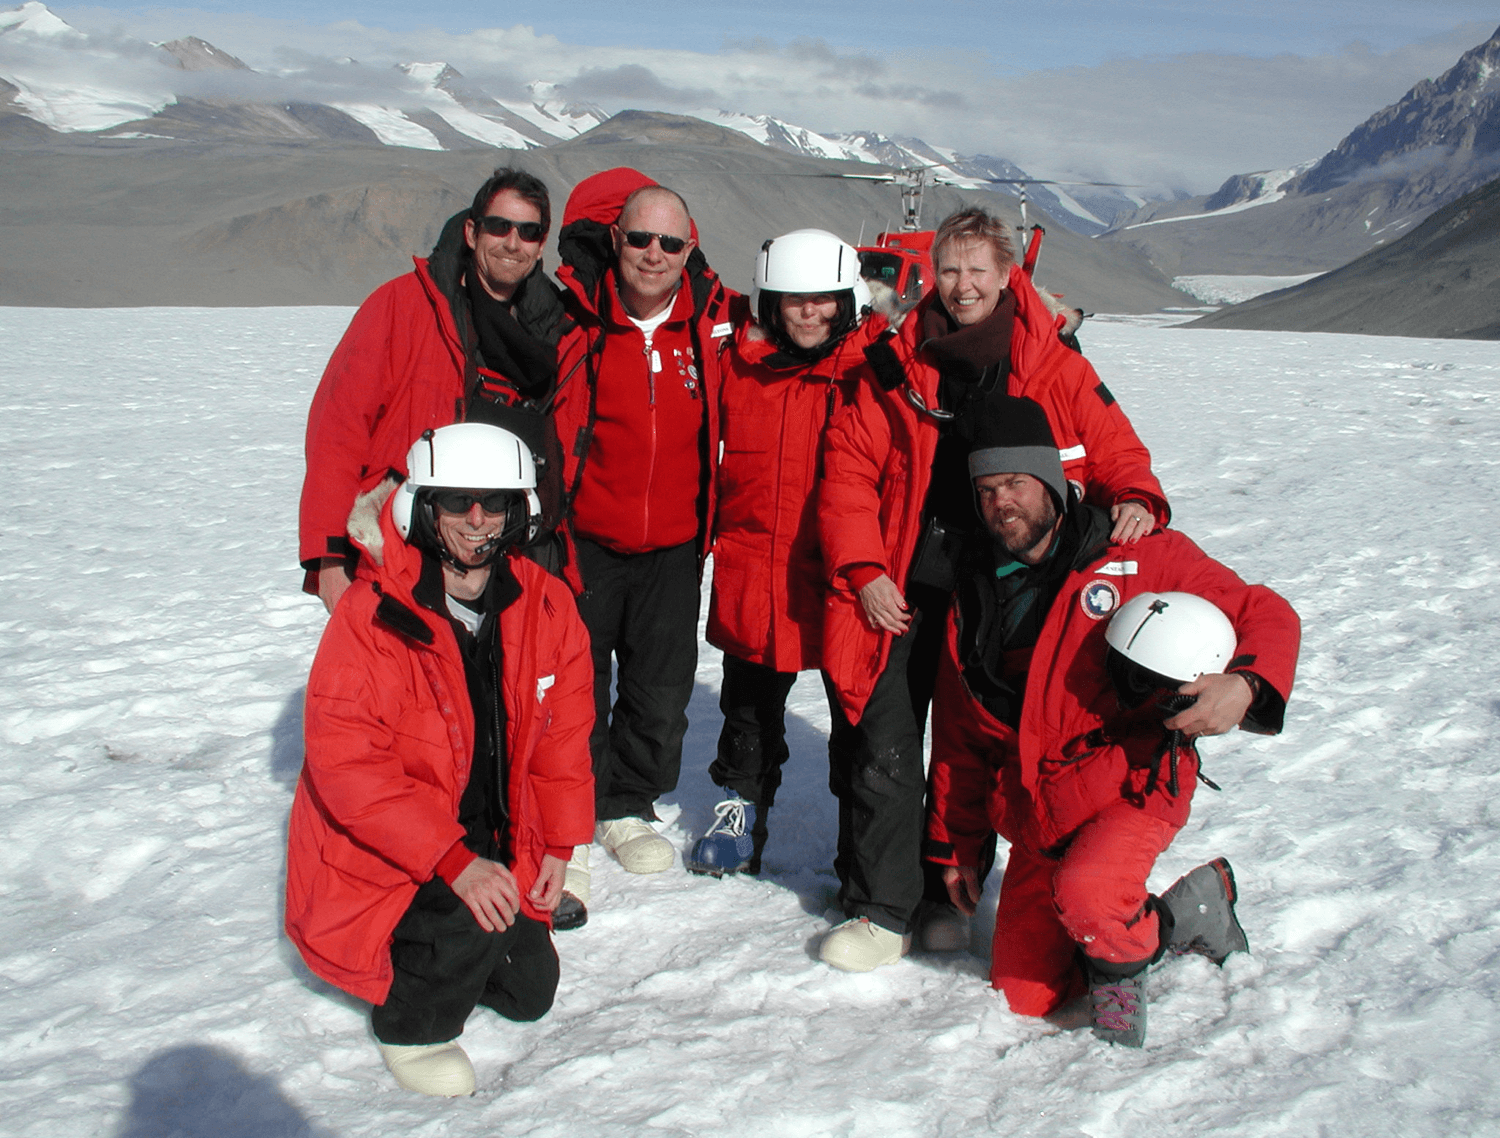 LTER group photo from 2002.Group is standing on the Canada Glacier, in Taylor Valley of the McMurdo Dry Valleys. Credit: Berry Lyons